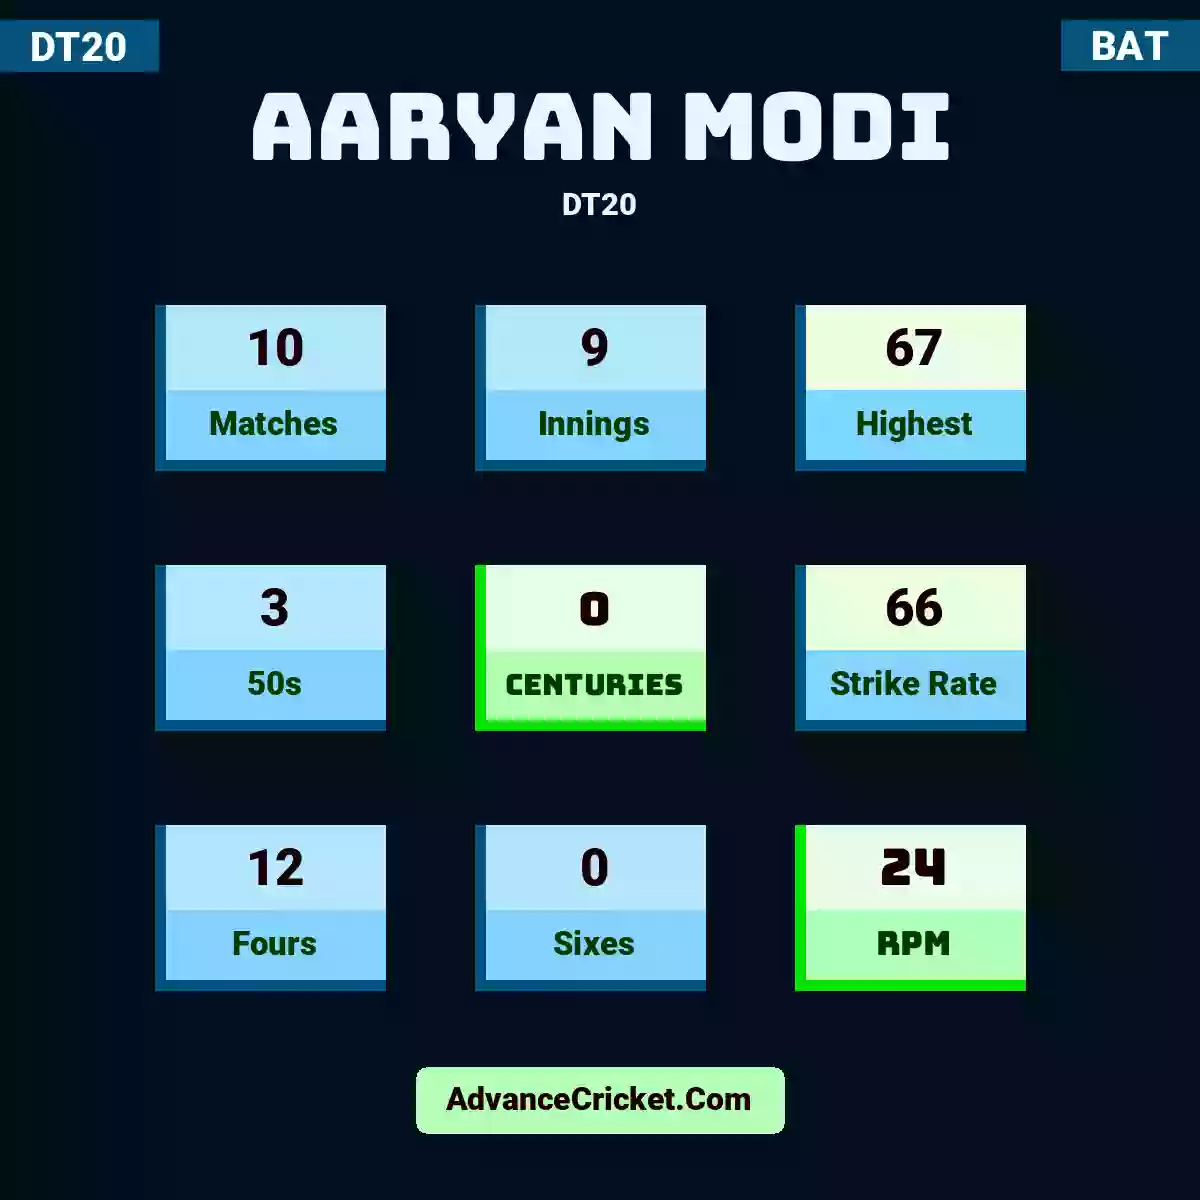 Aaryan Modi DT20 , Aaryan Modi played 10 matches, scored 67 runs as highest, 3 half-centuries, and 0 centuries, with a strike rate of 66. A.Modi hit 12 fours and 0 sixes, with an RPM of 24.